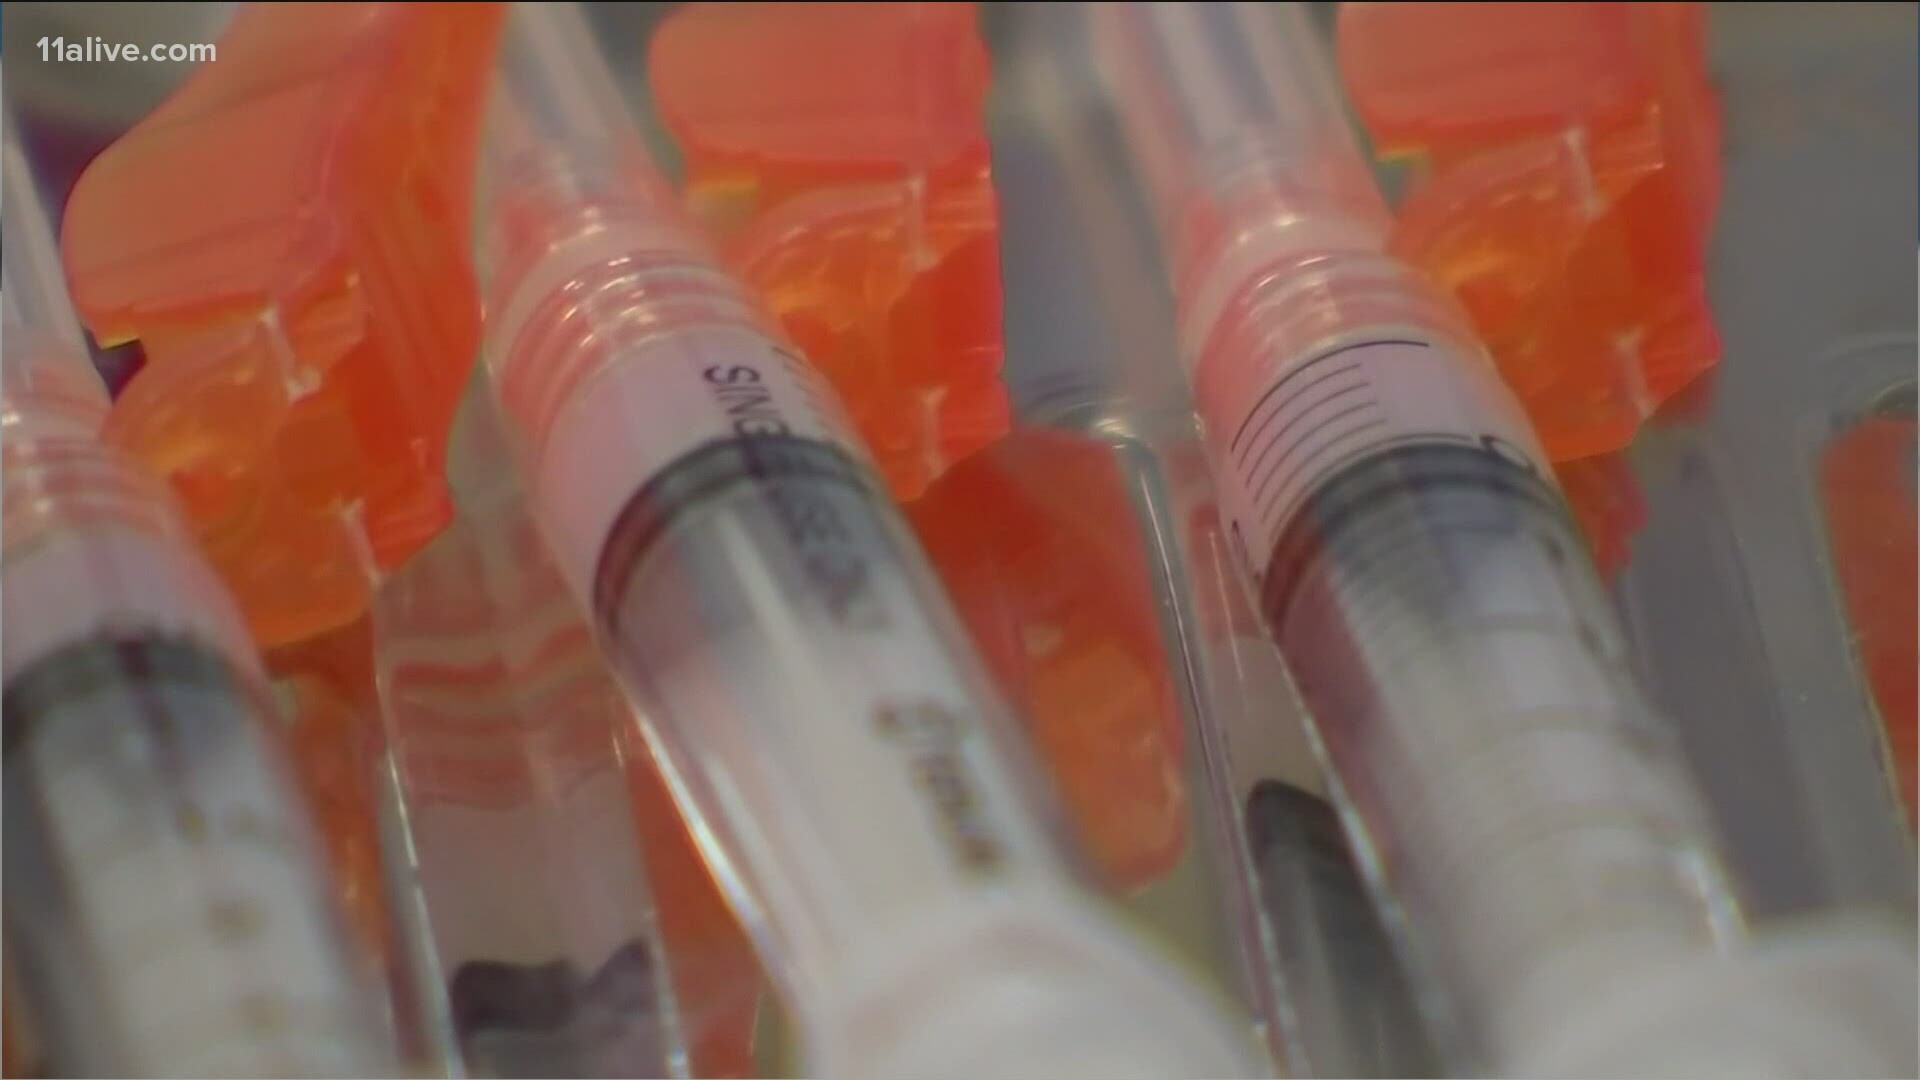 Georgia Gov. Brian Kemp announced earlier this week that additional groups will be eligible for receiving the COVID vaccine beginning Monday, March 8.